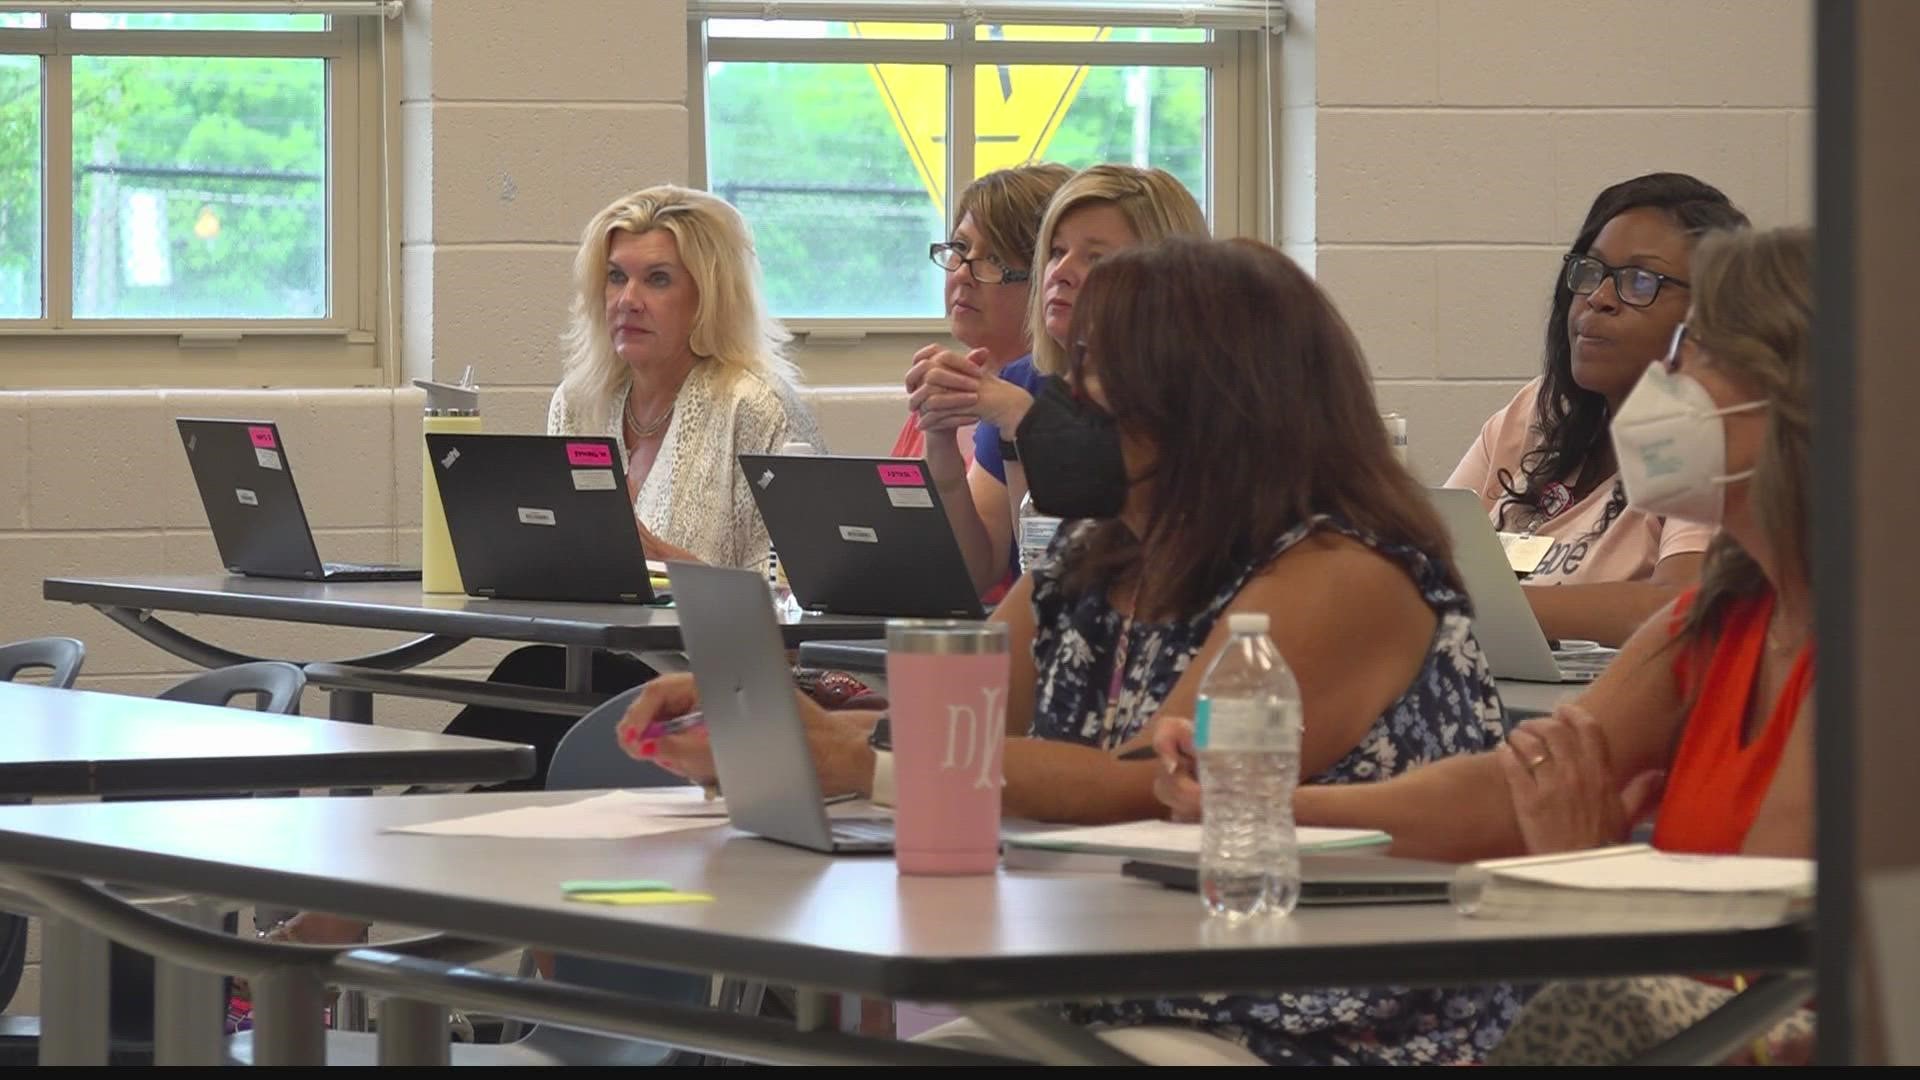 Educators will be training all week-long with focuses on school curriculum, resources available for students who need extra help, and new school safety technology.